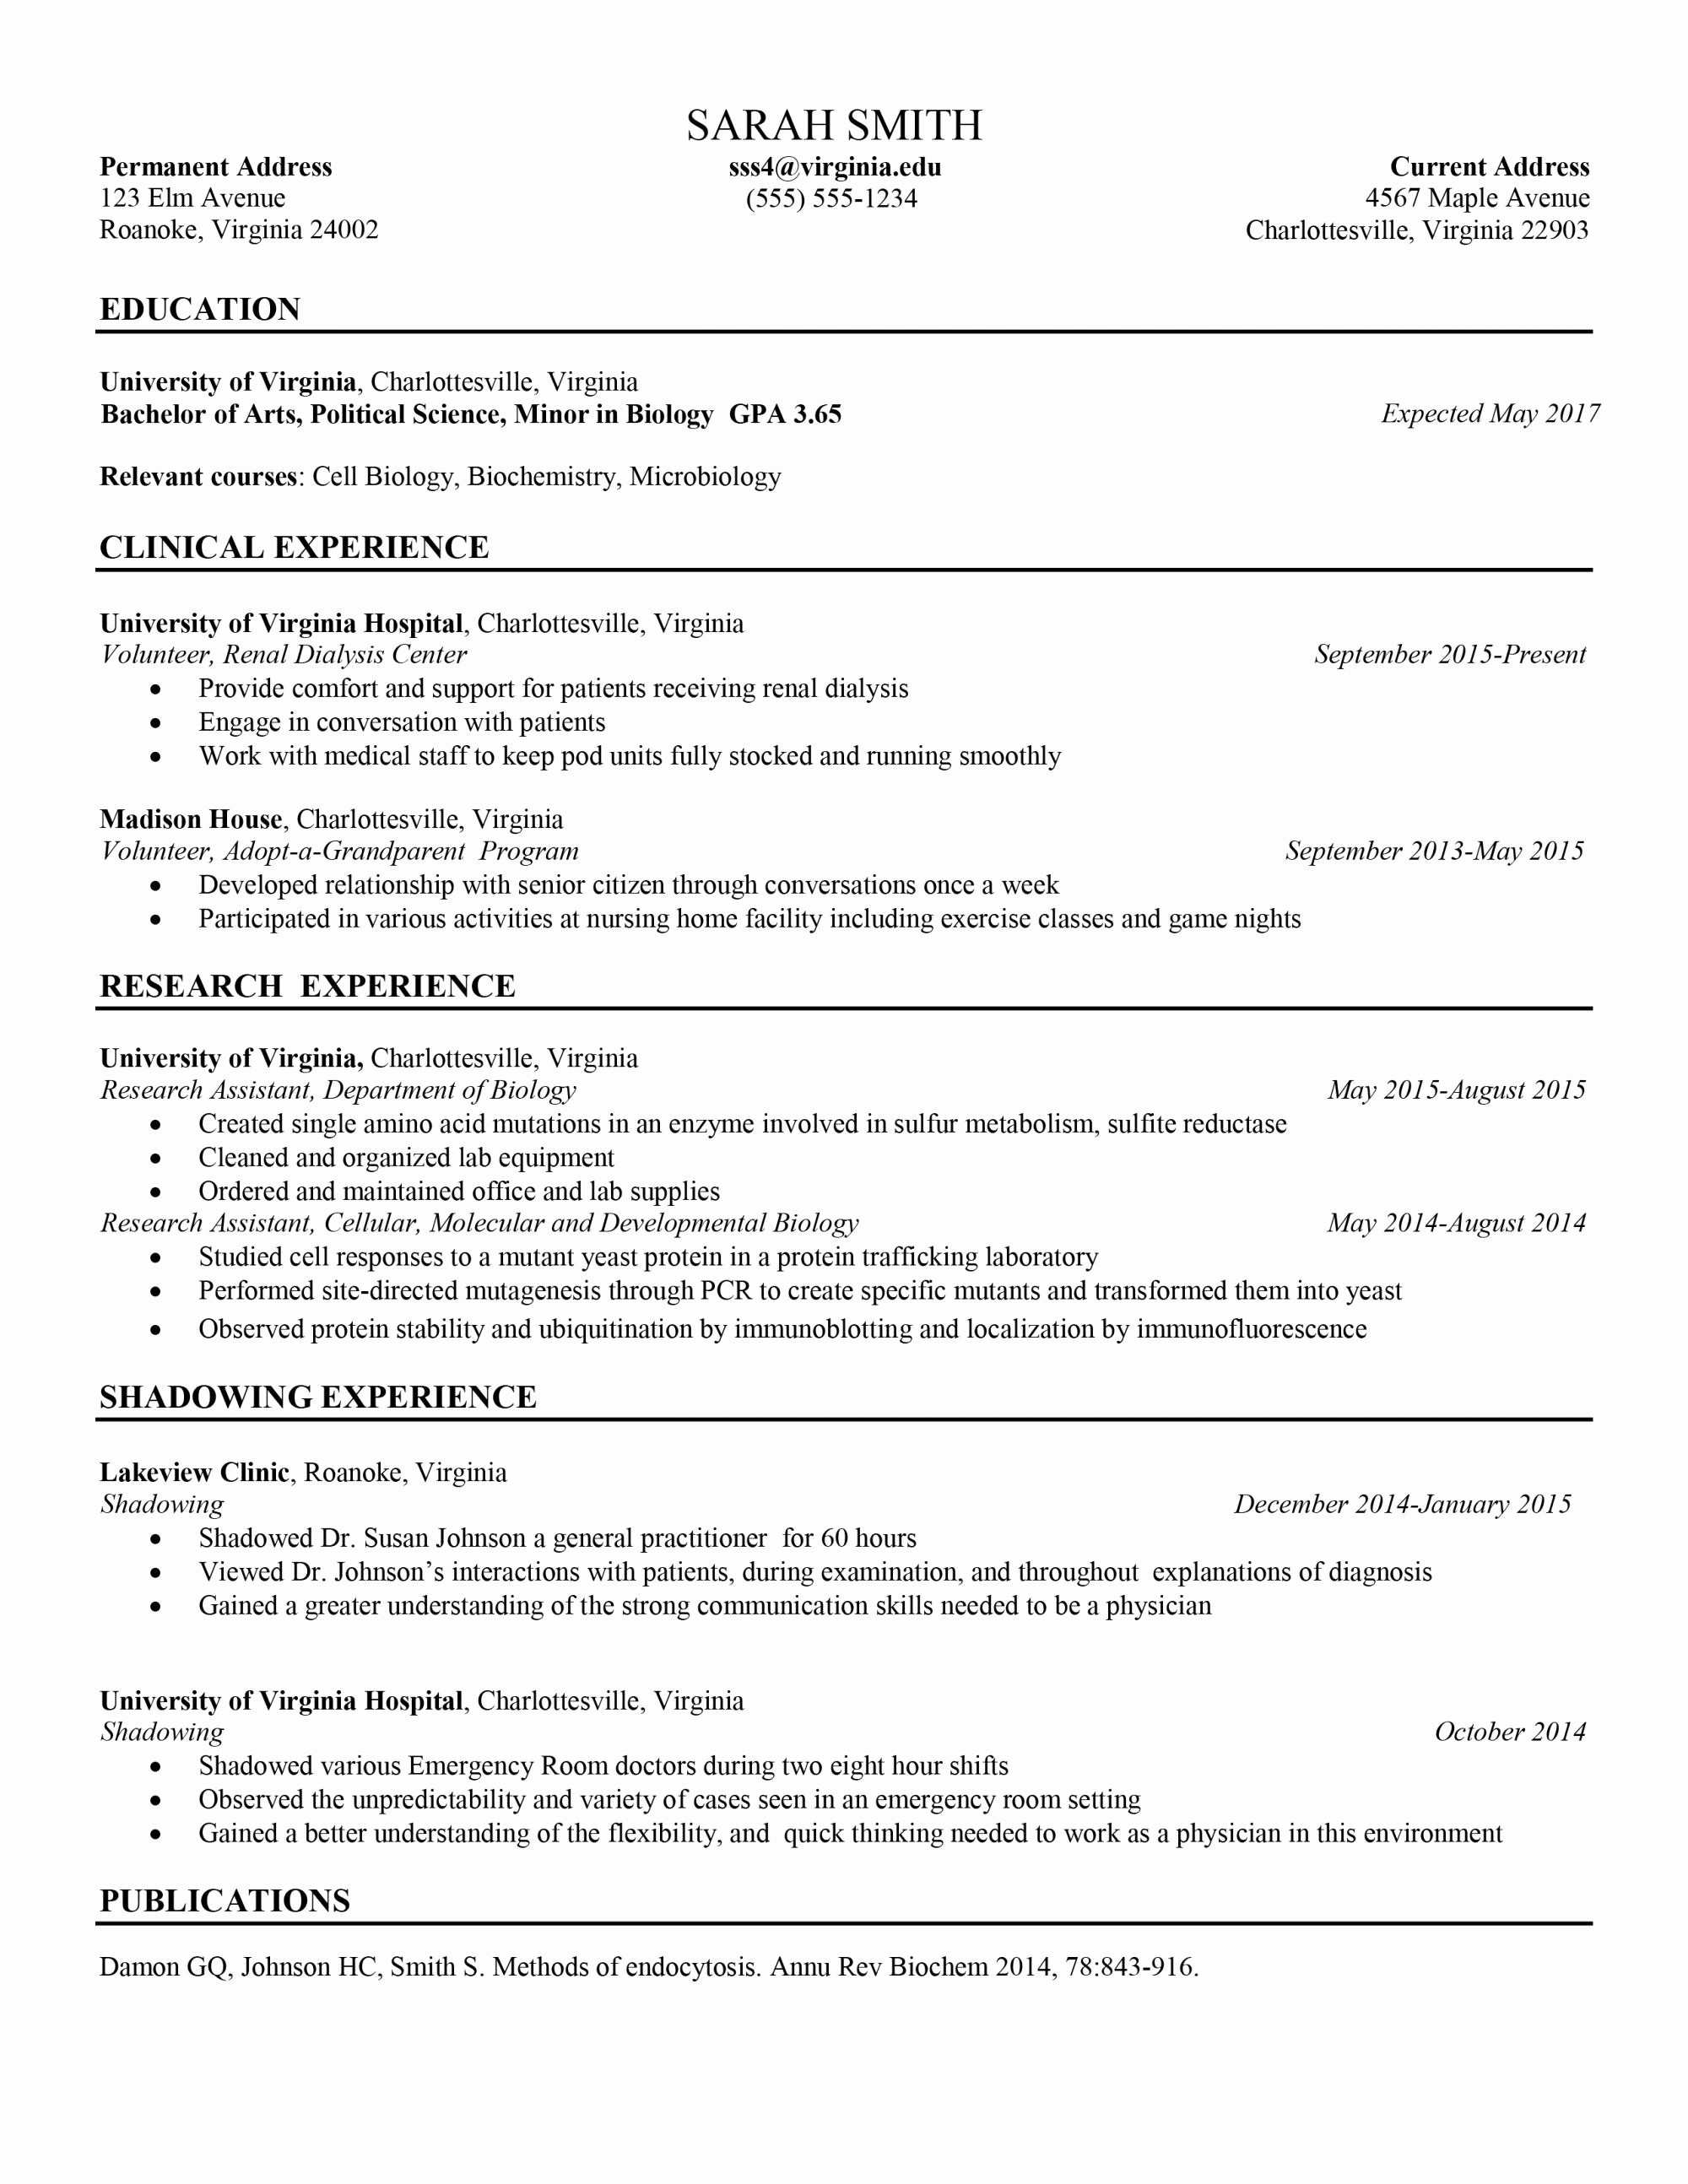 Legal Letter Template - Sample Resume Cover Letter Beautiful Resume Templates and Cover